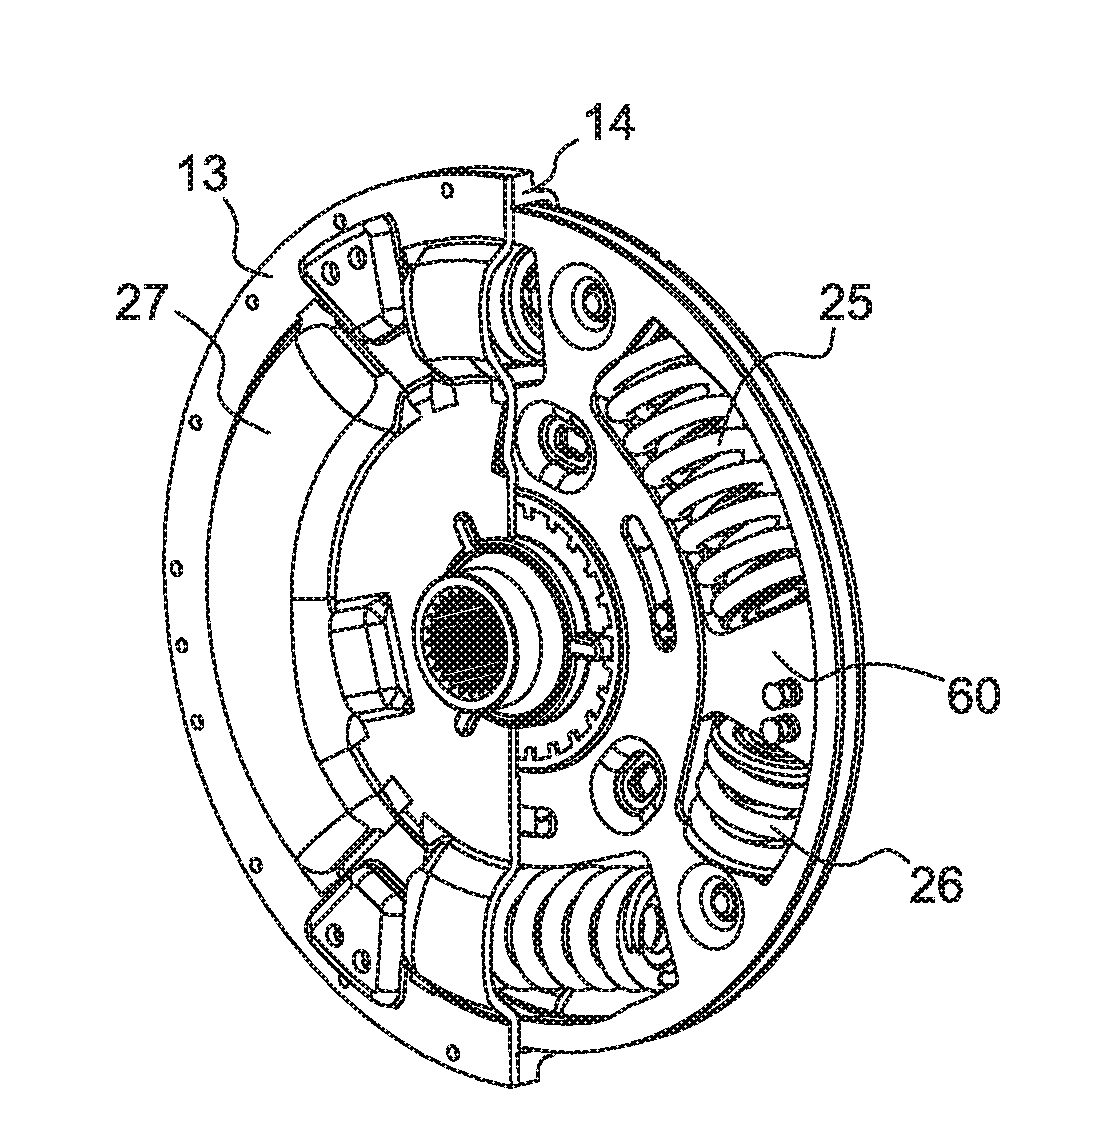 Torsional damping device for a motor vehicle transmission system